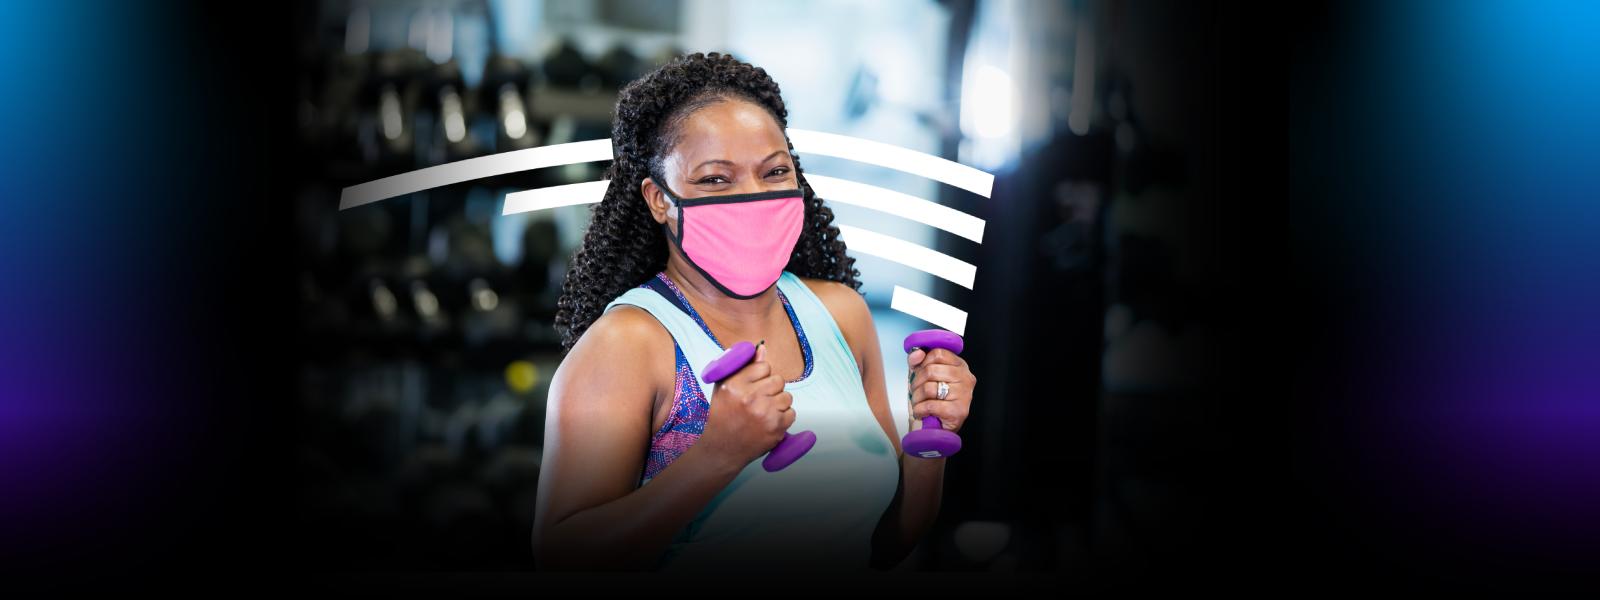 Woman wearing a mask holding dumbbells 